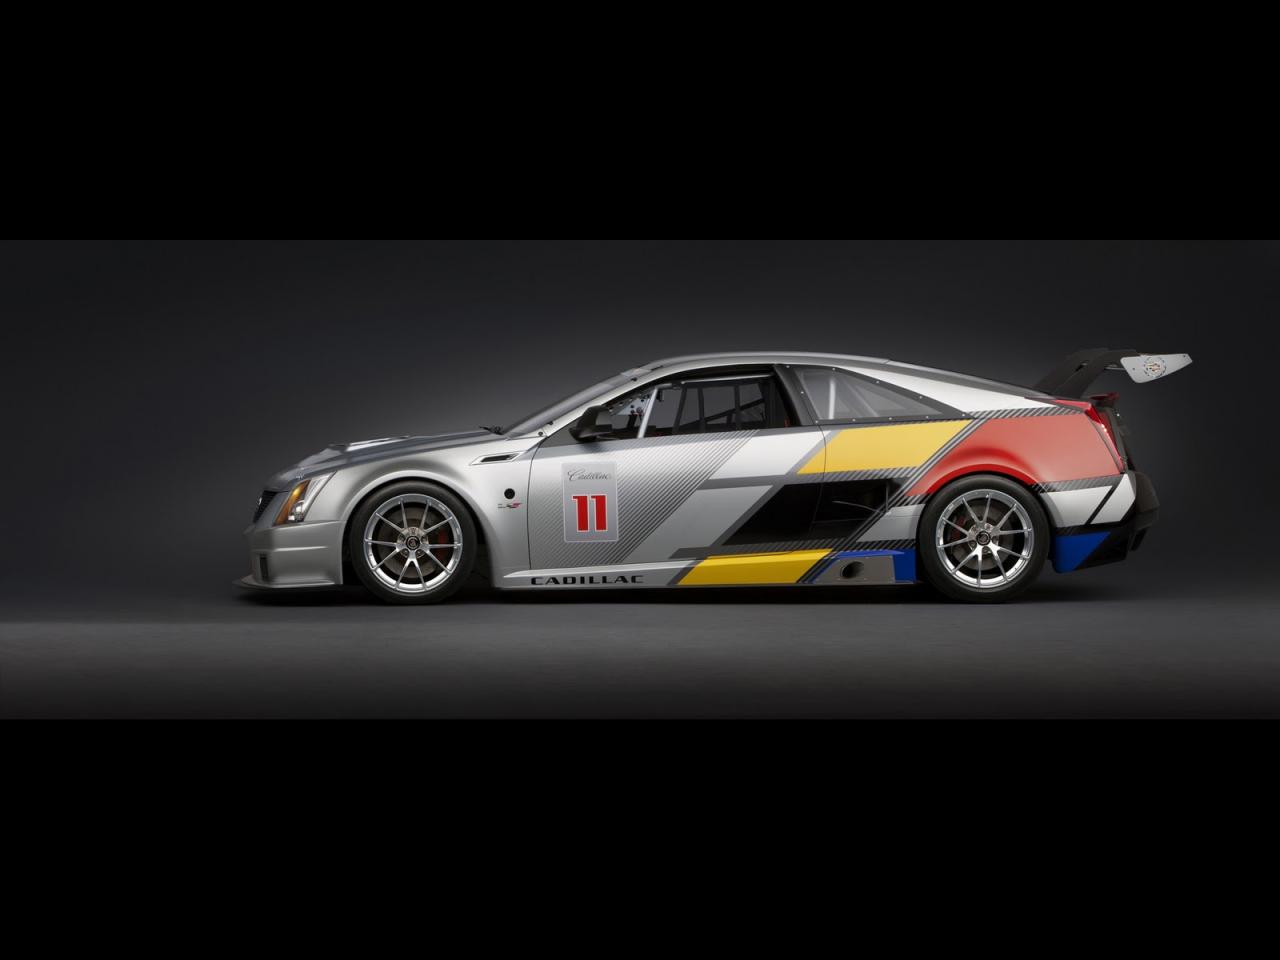 2011 Cadillac CTS V Coupe Racecar